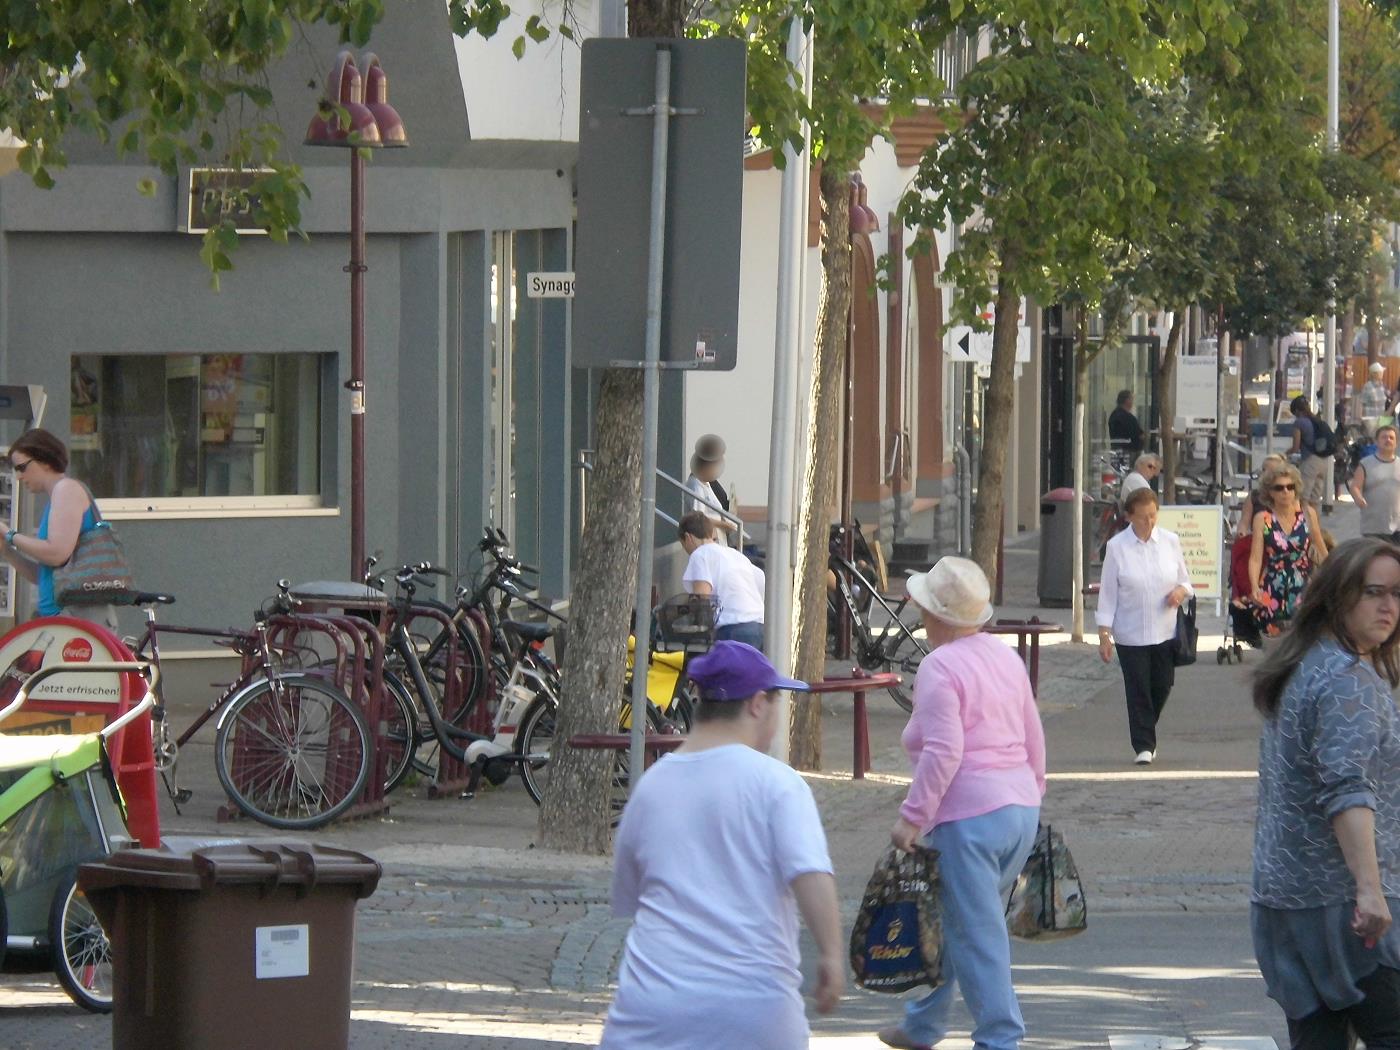 Wiesloch: Two Hours of Reconnaissance on Jehovah's Witnesses